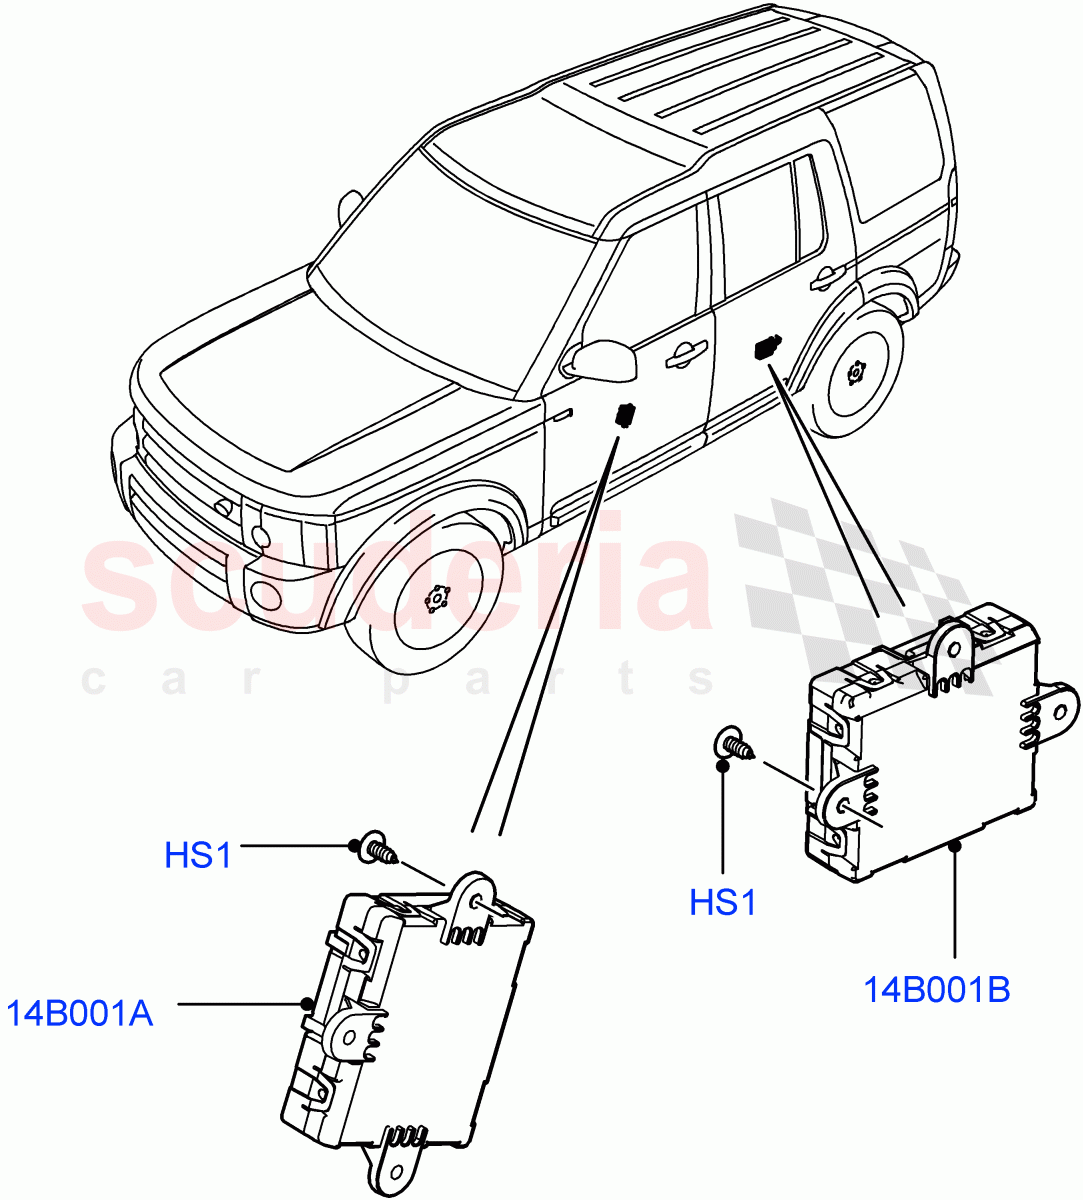 Vehicle Modules And Sensors(Door)((V)FROMAA000001) of Land Rover Land Rover Discovery 4 (2010-2016) [2.7 Diesel V6]